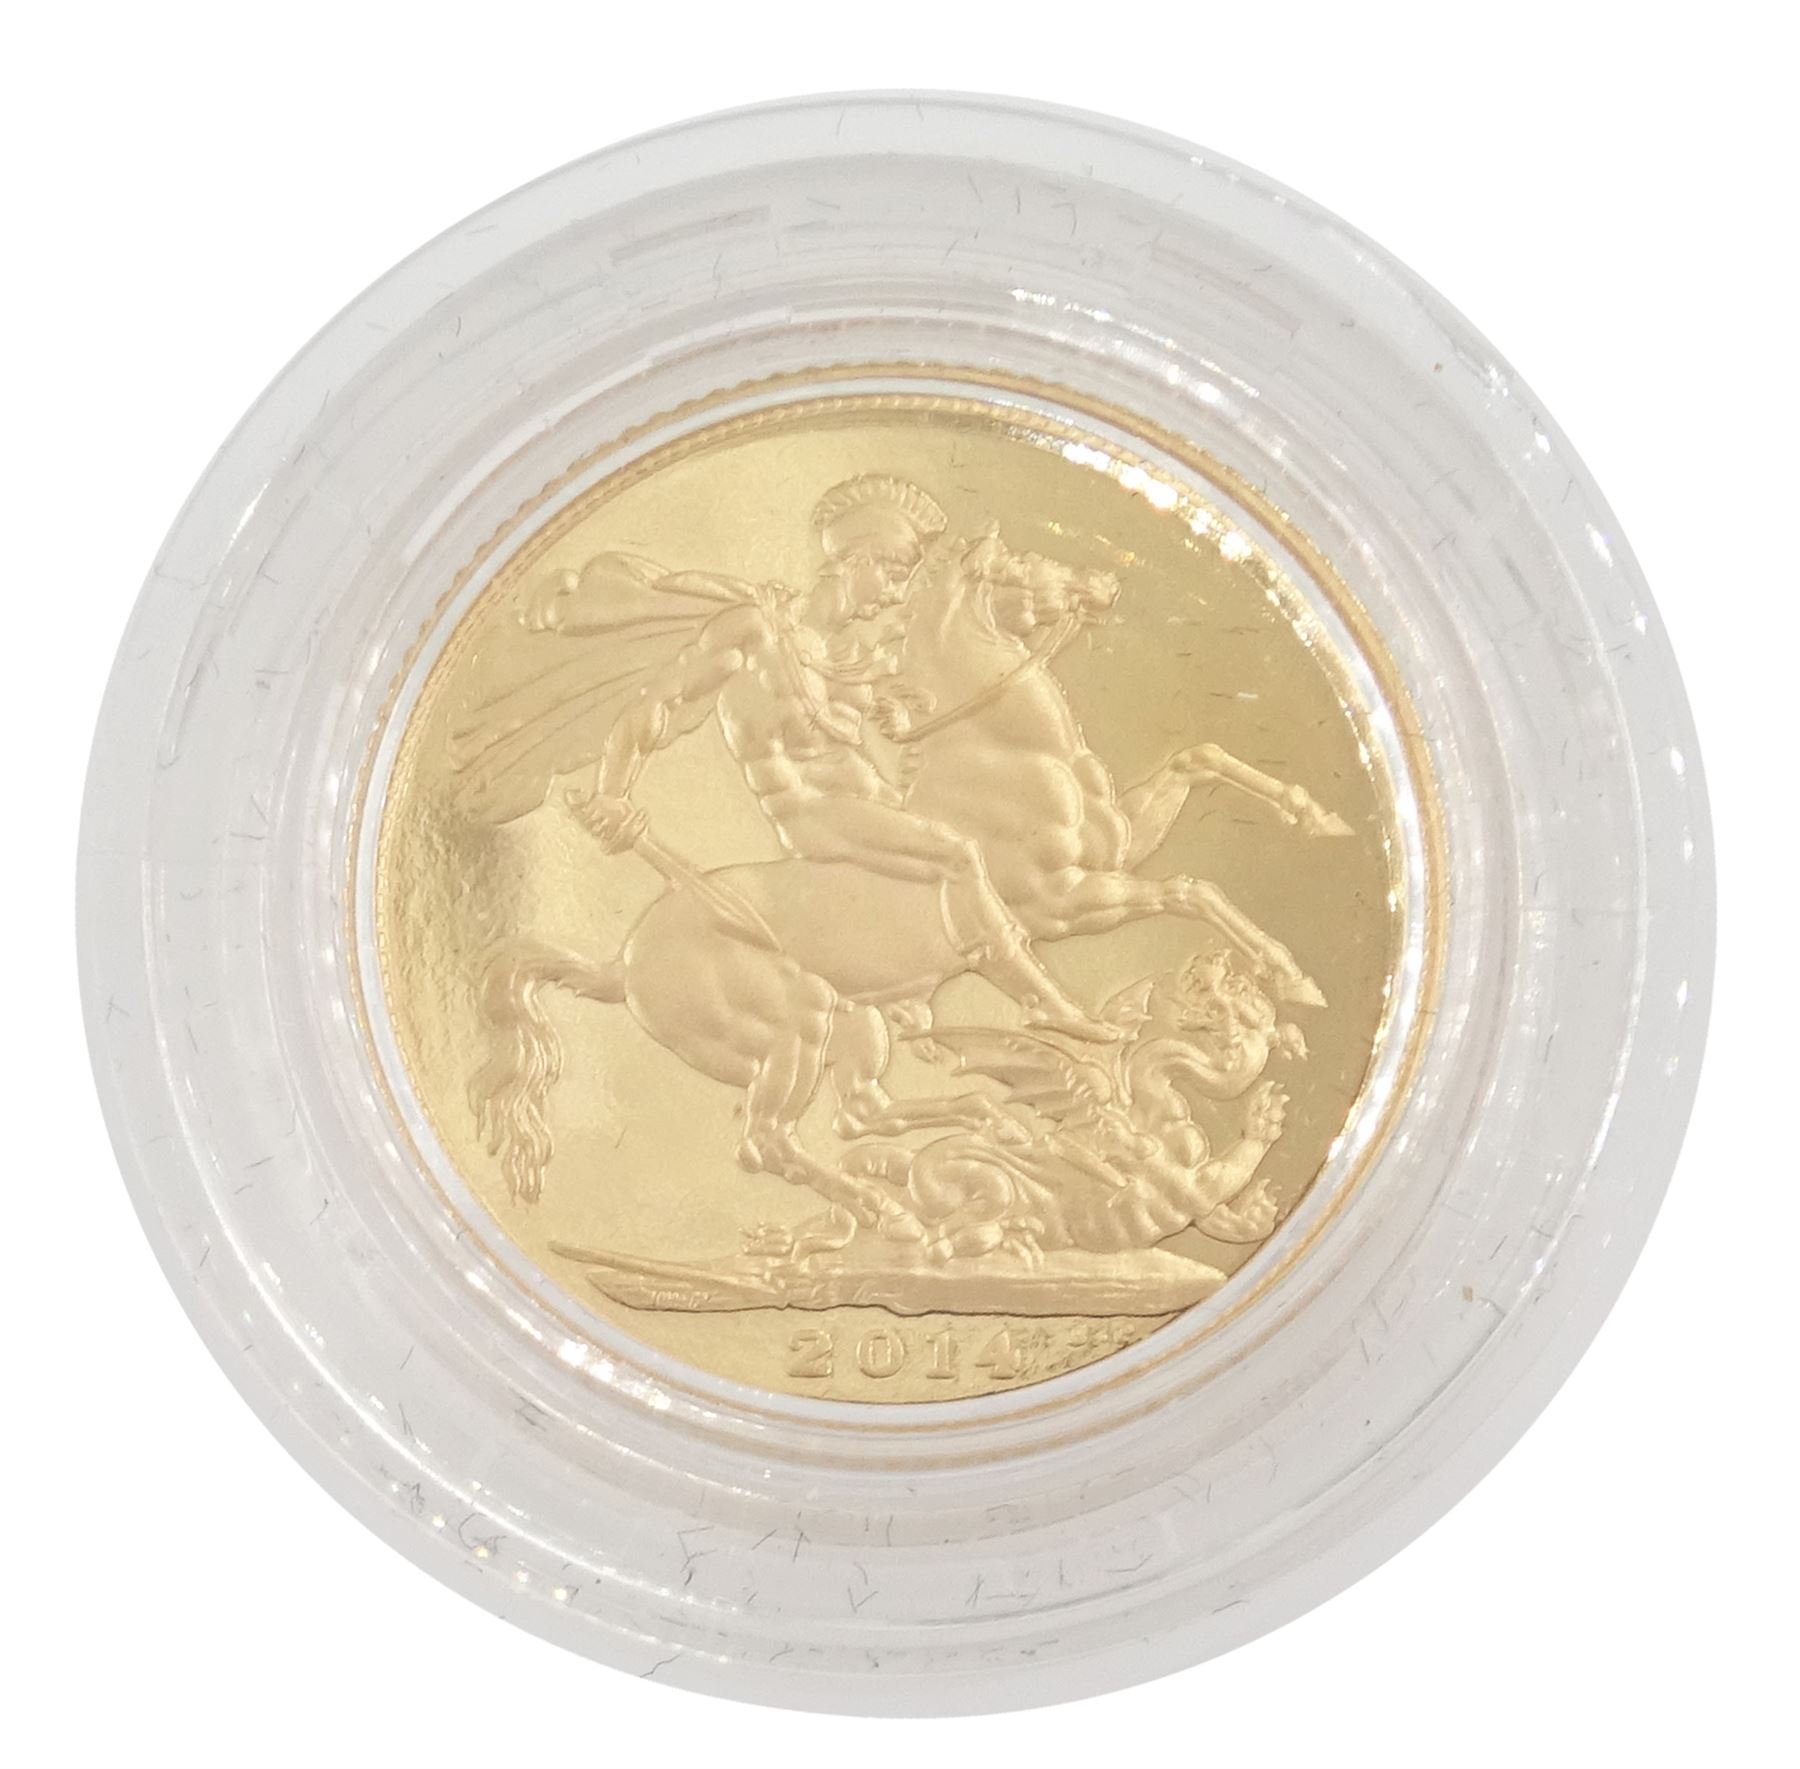 Queen Elizabeth II 2013 gold proof full sovereign coin - Image 3 of 4